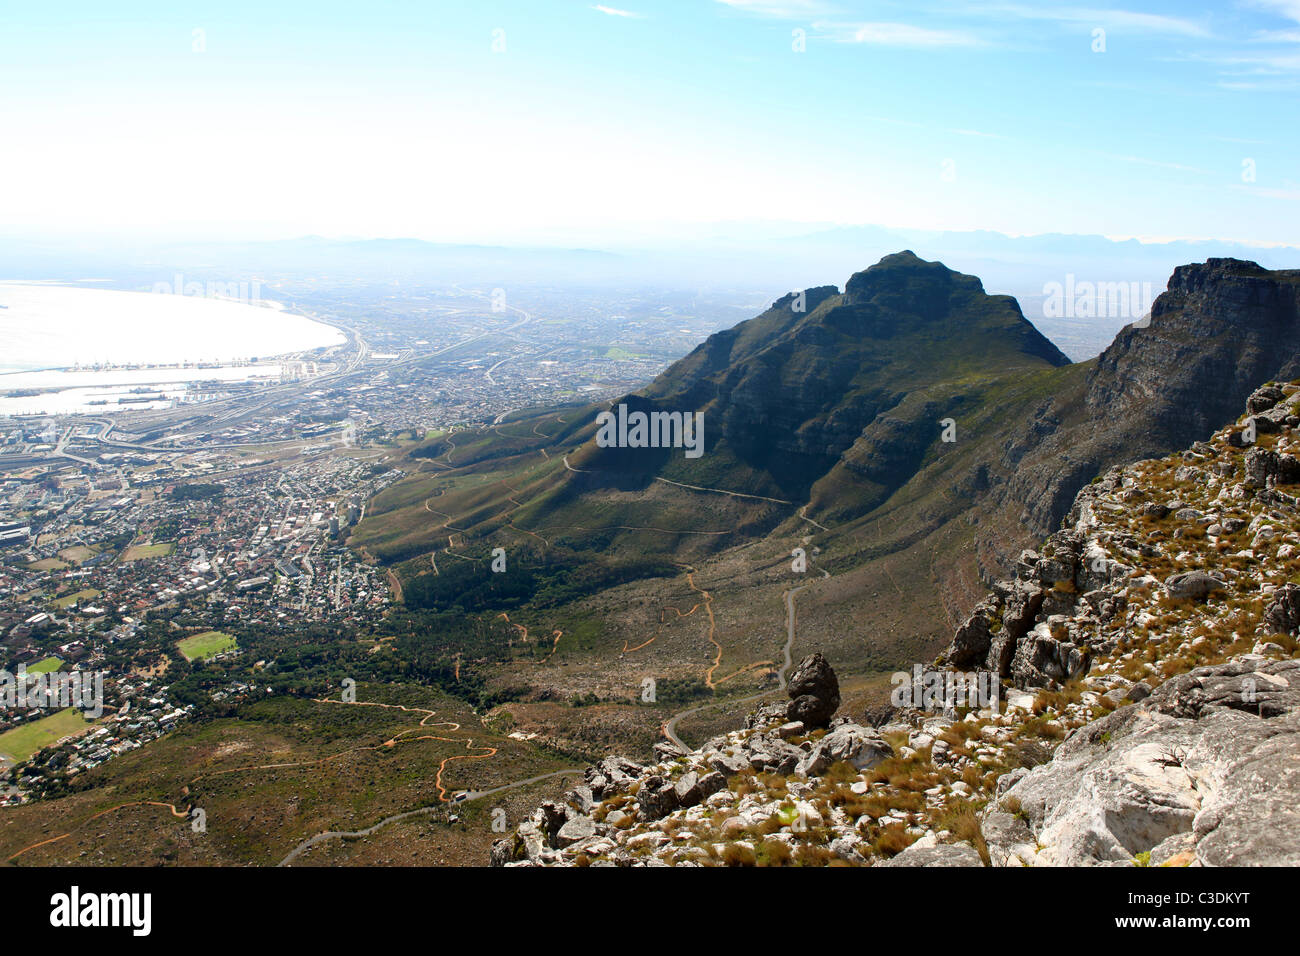 Devil's Peak in the distance, seen from Table Mountain, Cape Town, South Africa. Stock Photo